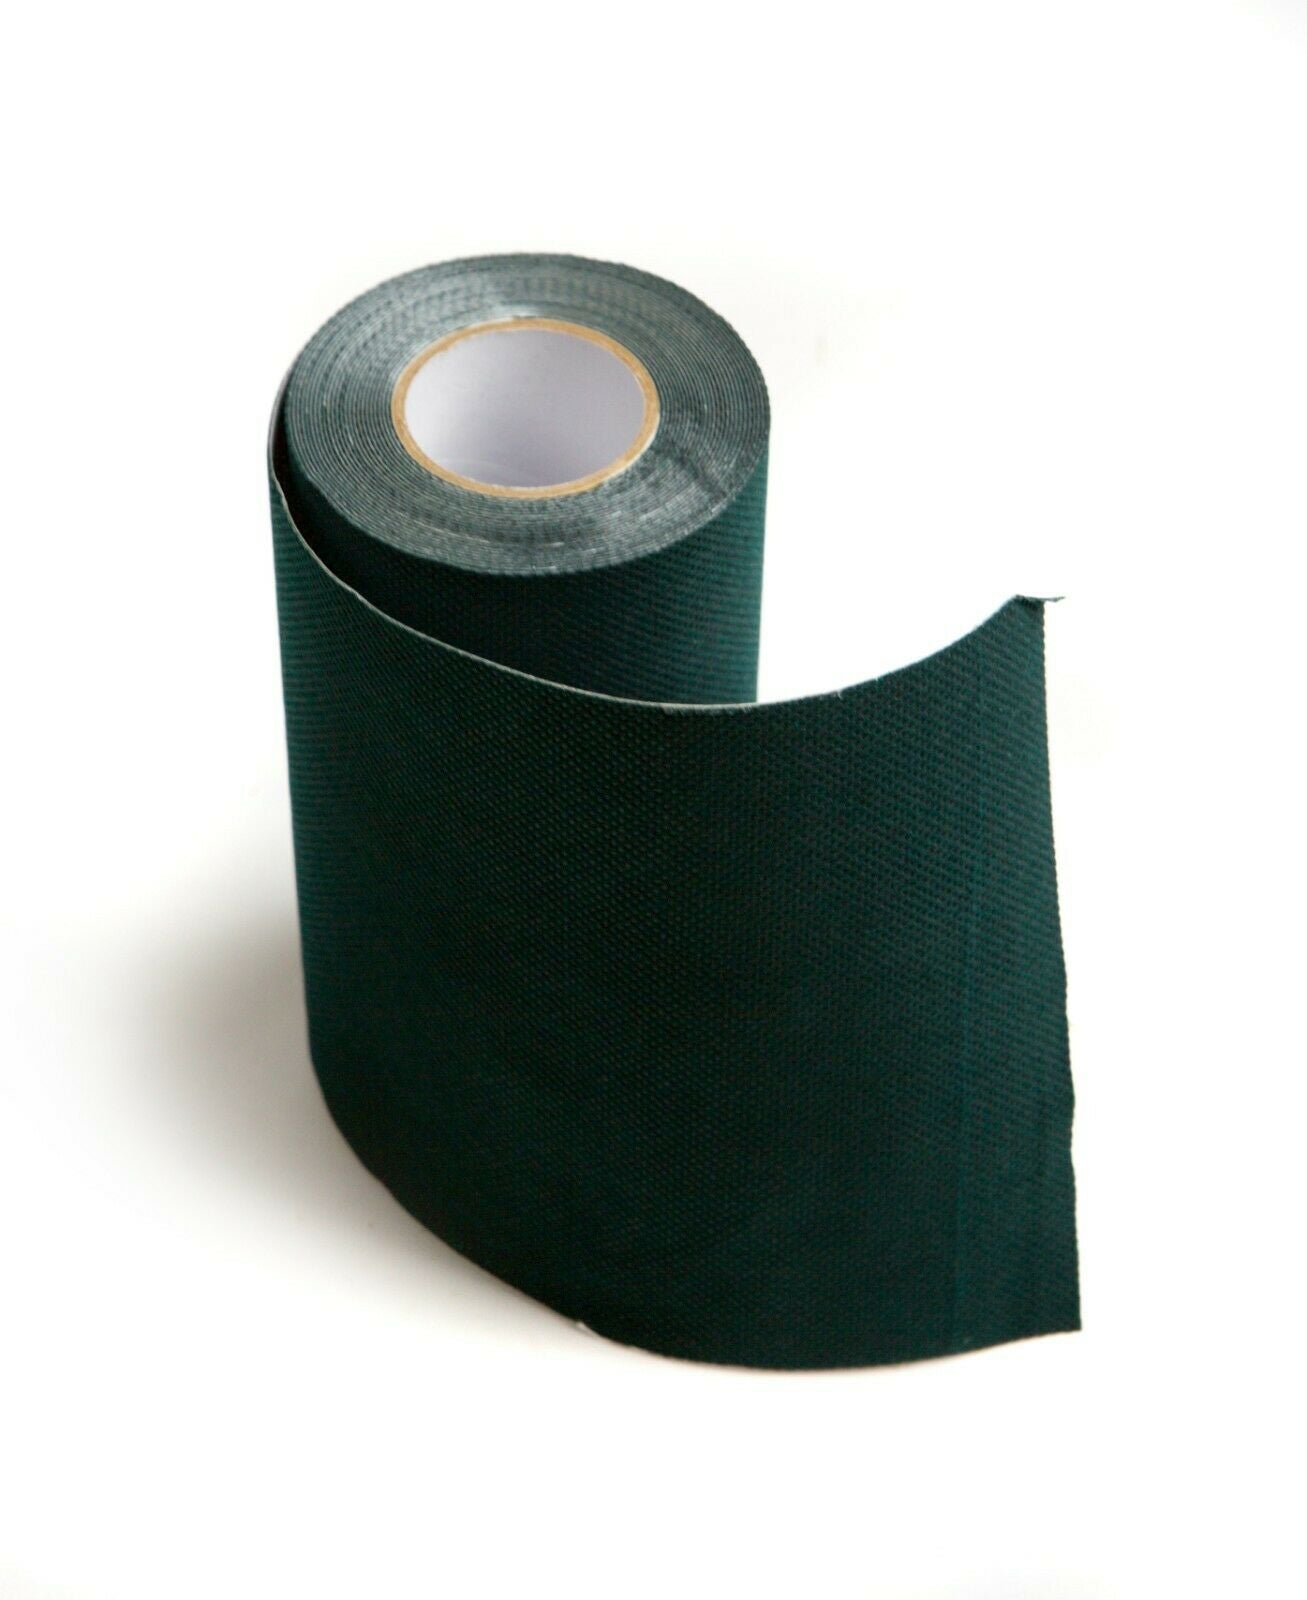 Grass Joining Tape (5m x 15cm)